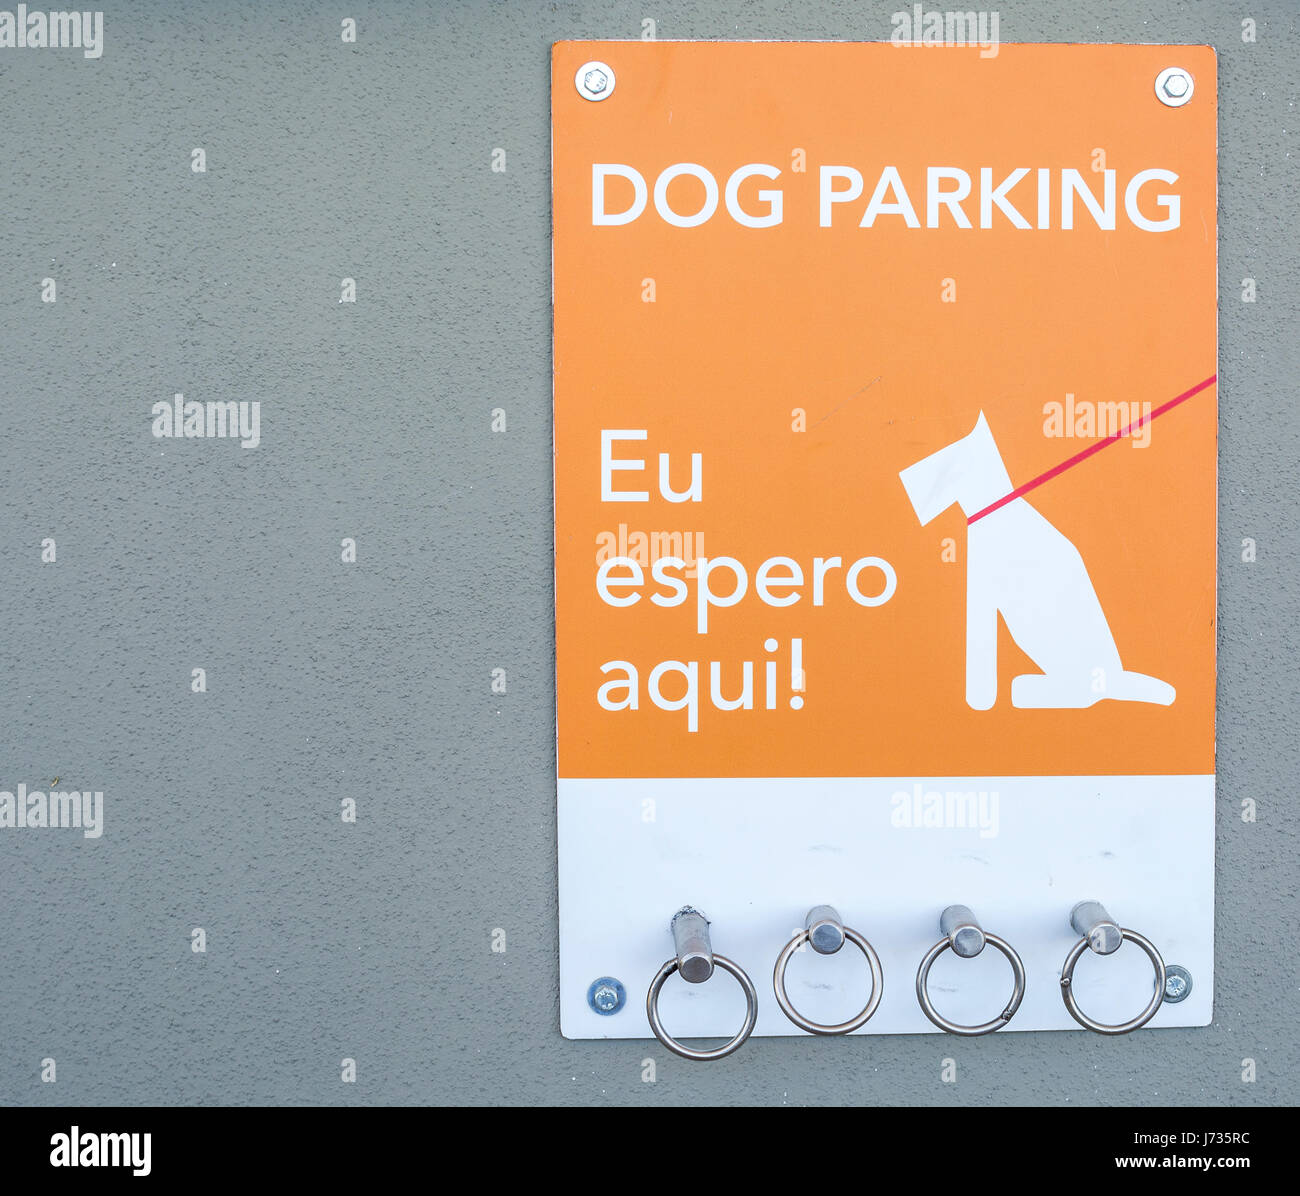 Cute Dog Parking sign - I am waiting here - outside a supermarket Stock Photo